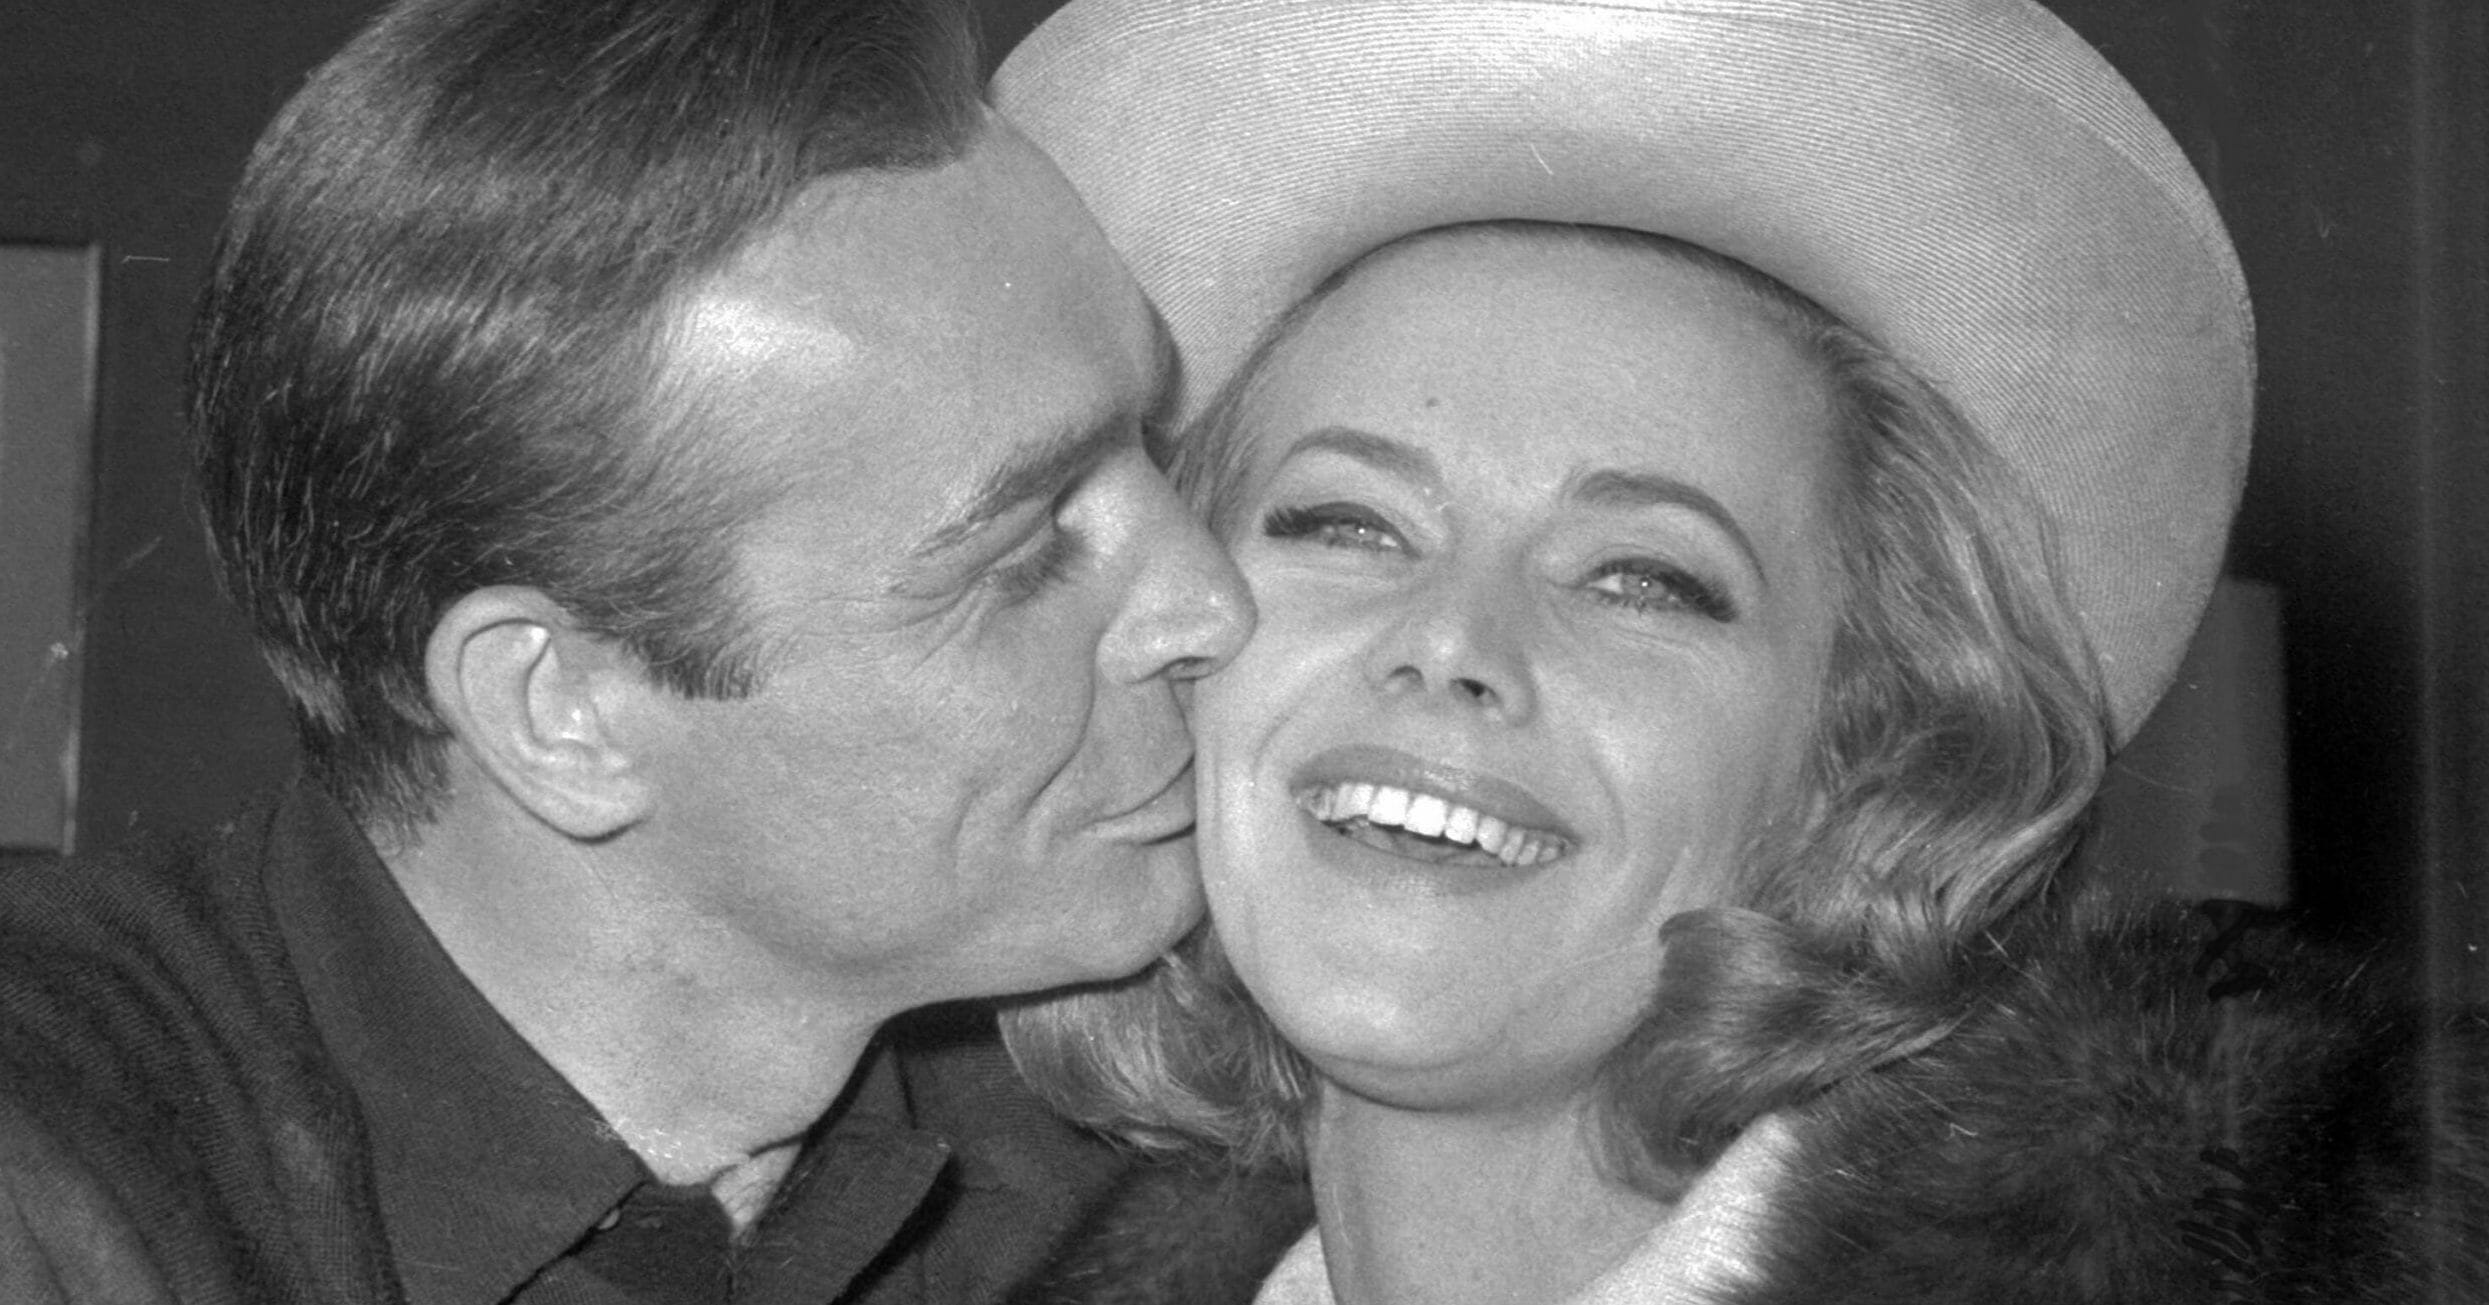 British actor Sean Connery kisses actress Honor Blackman during a party at Pinewood Film Studio, in Iver Heath, England, on March 25, 1964.